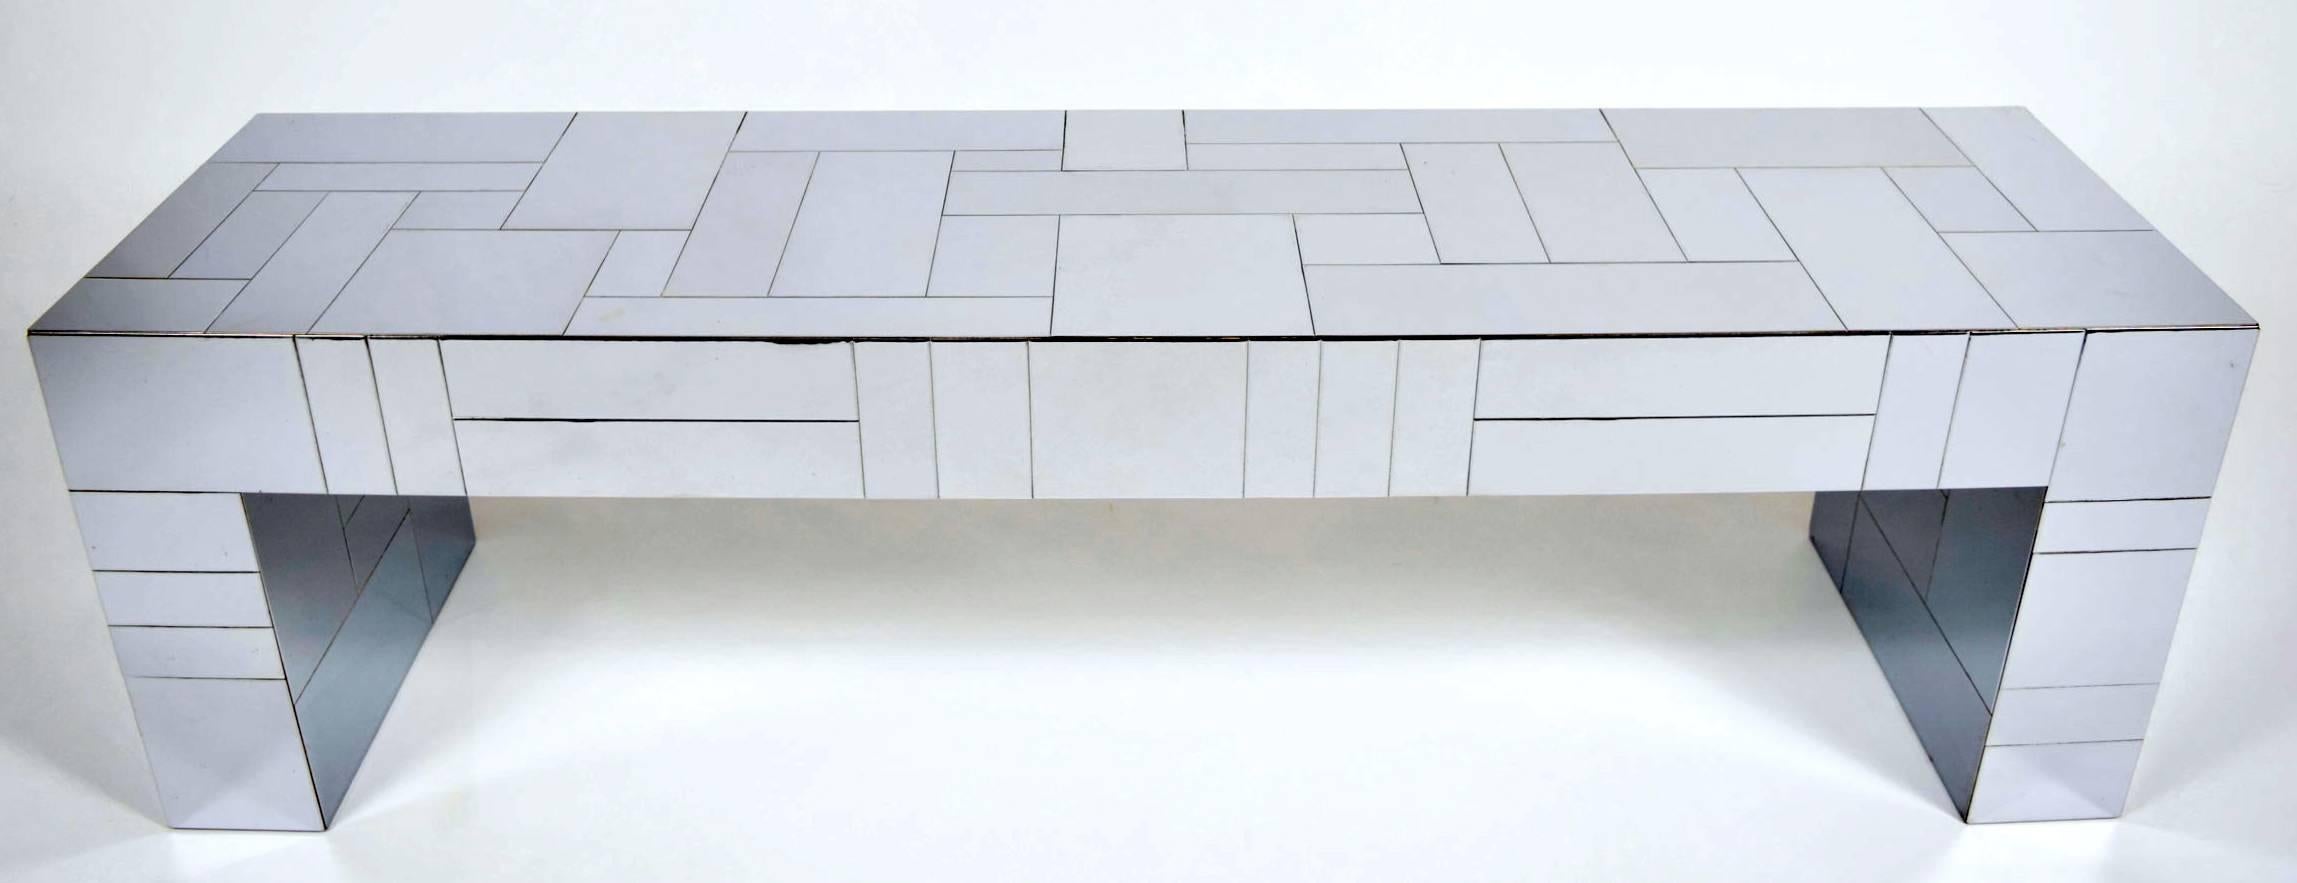 Chrome plated steel Cityscape console by Paul Evans for Directional, circa 1970s, etched signature.